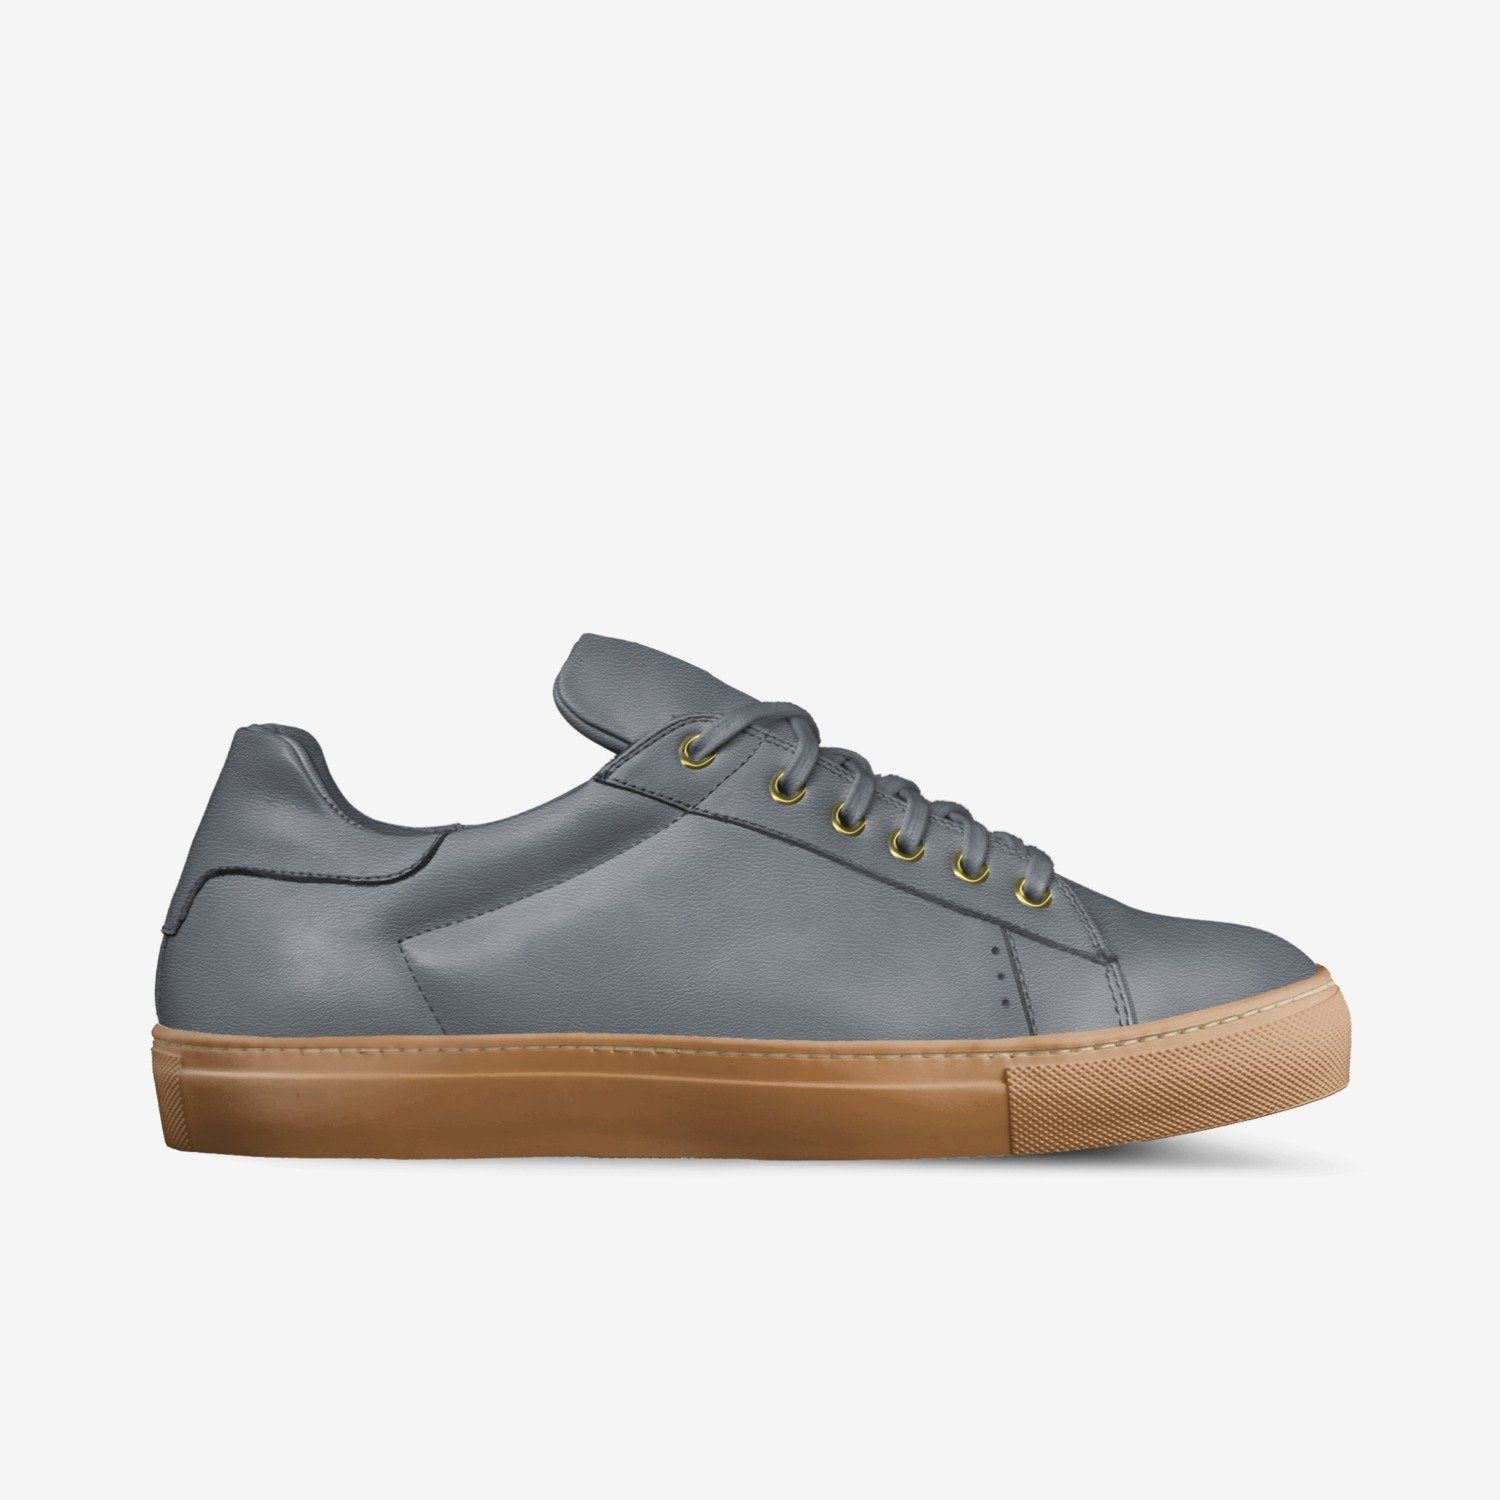 LORENZO LEATHER/GUM SOLE SNEAKERS IN 